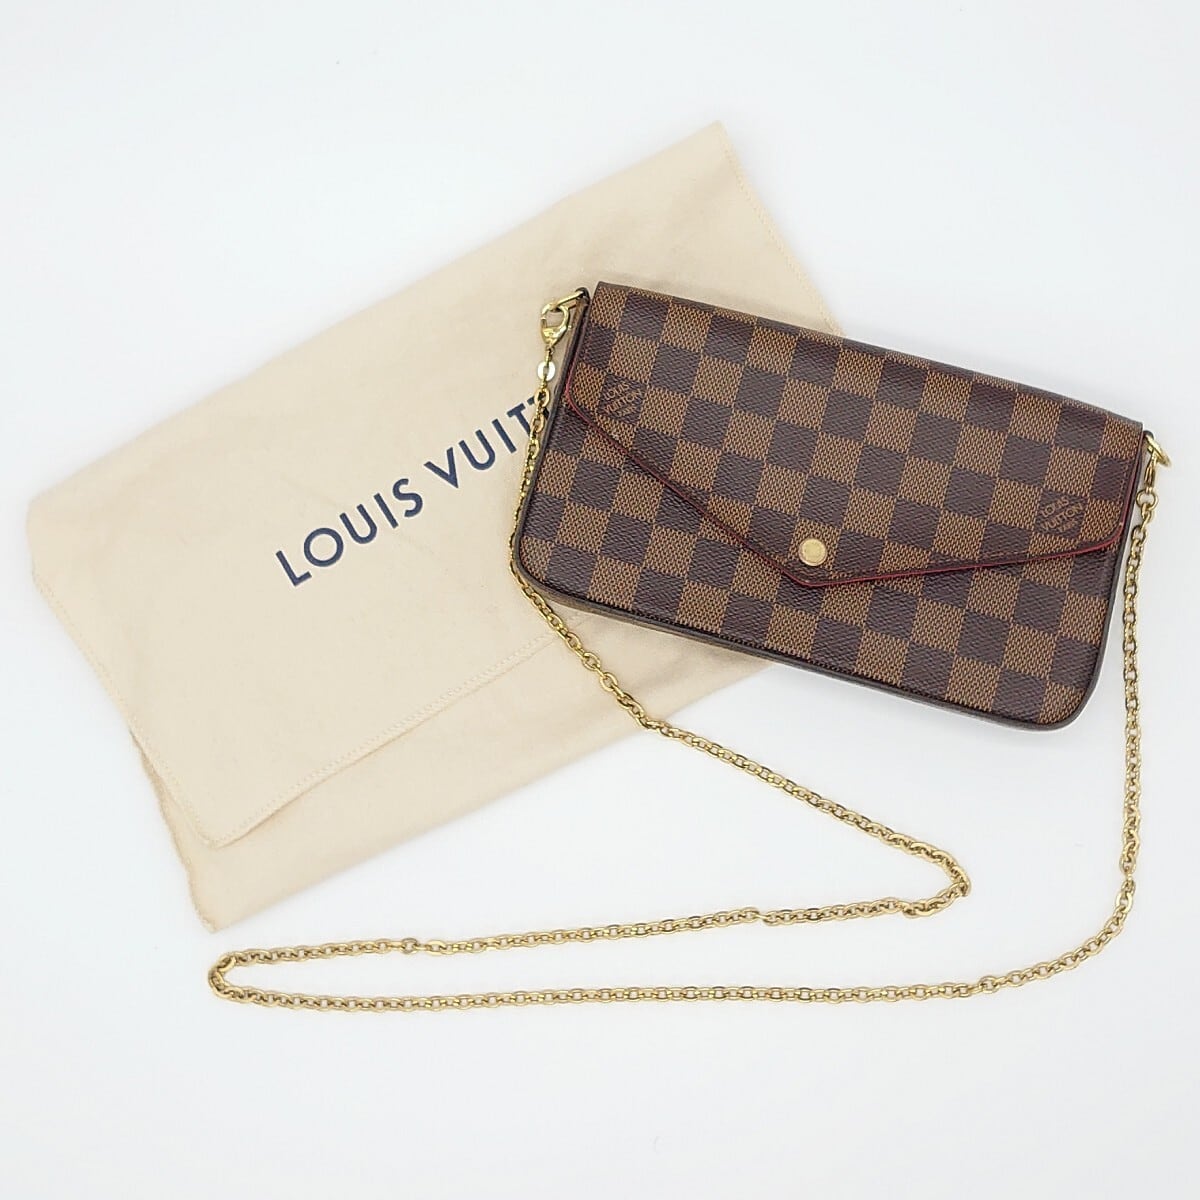 LOUIS VUITTON ルイ ヴィトン ポシェット・フェリシー ダミエ